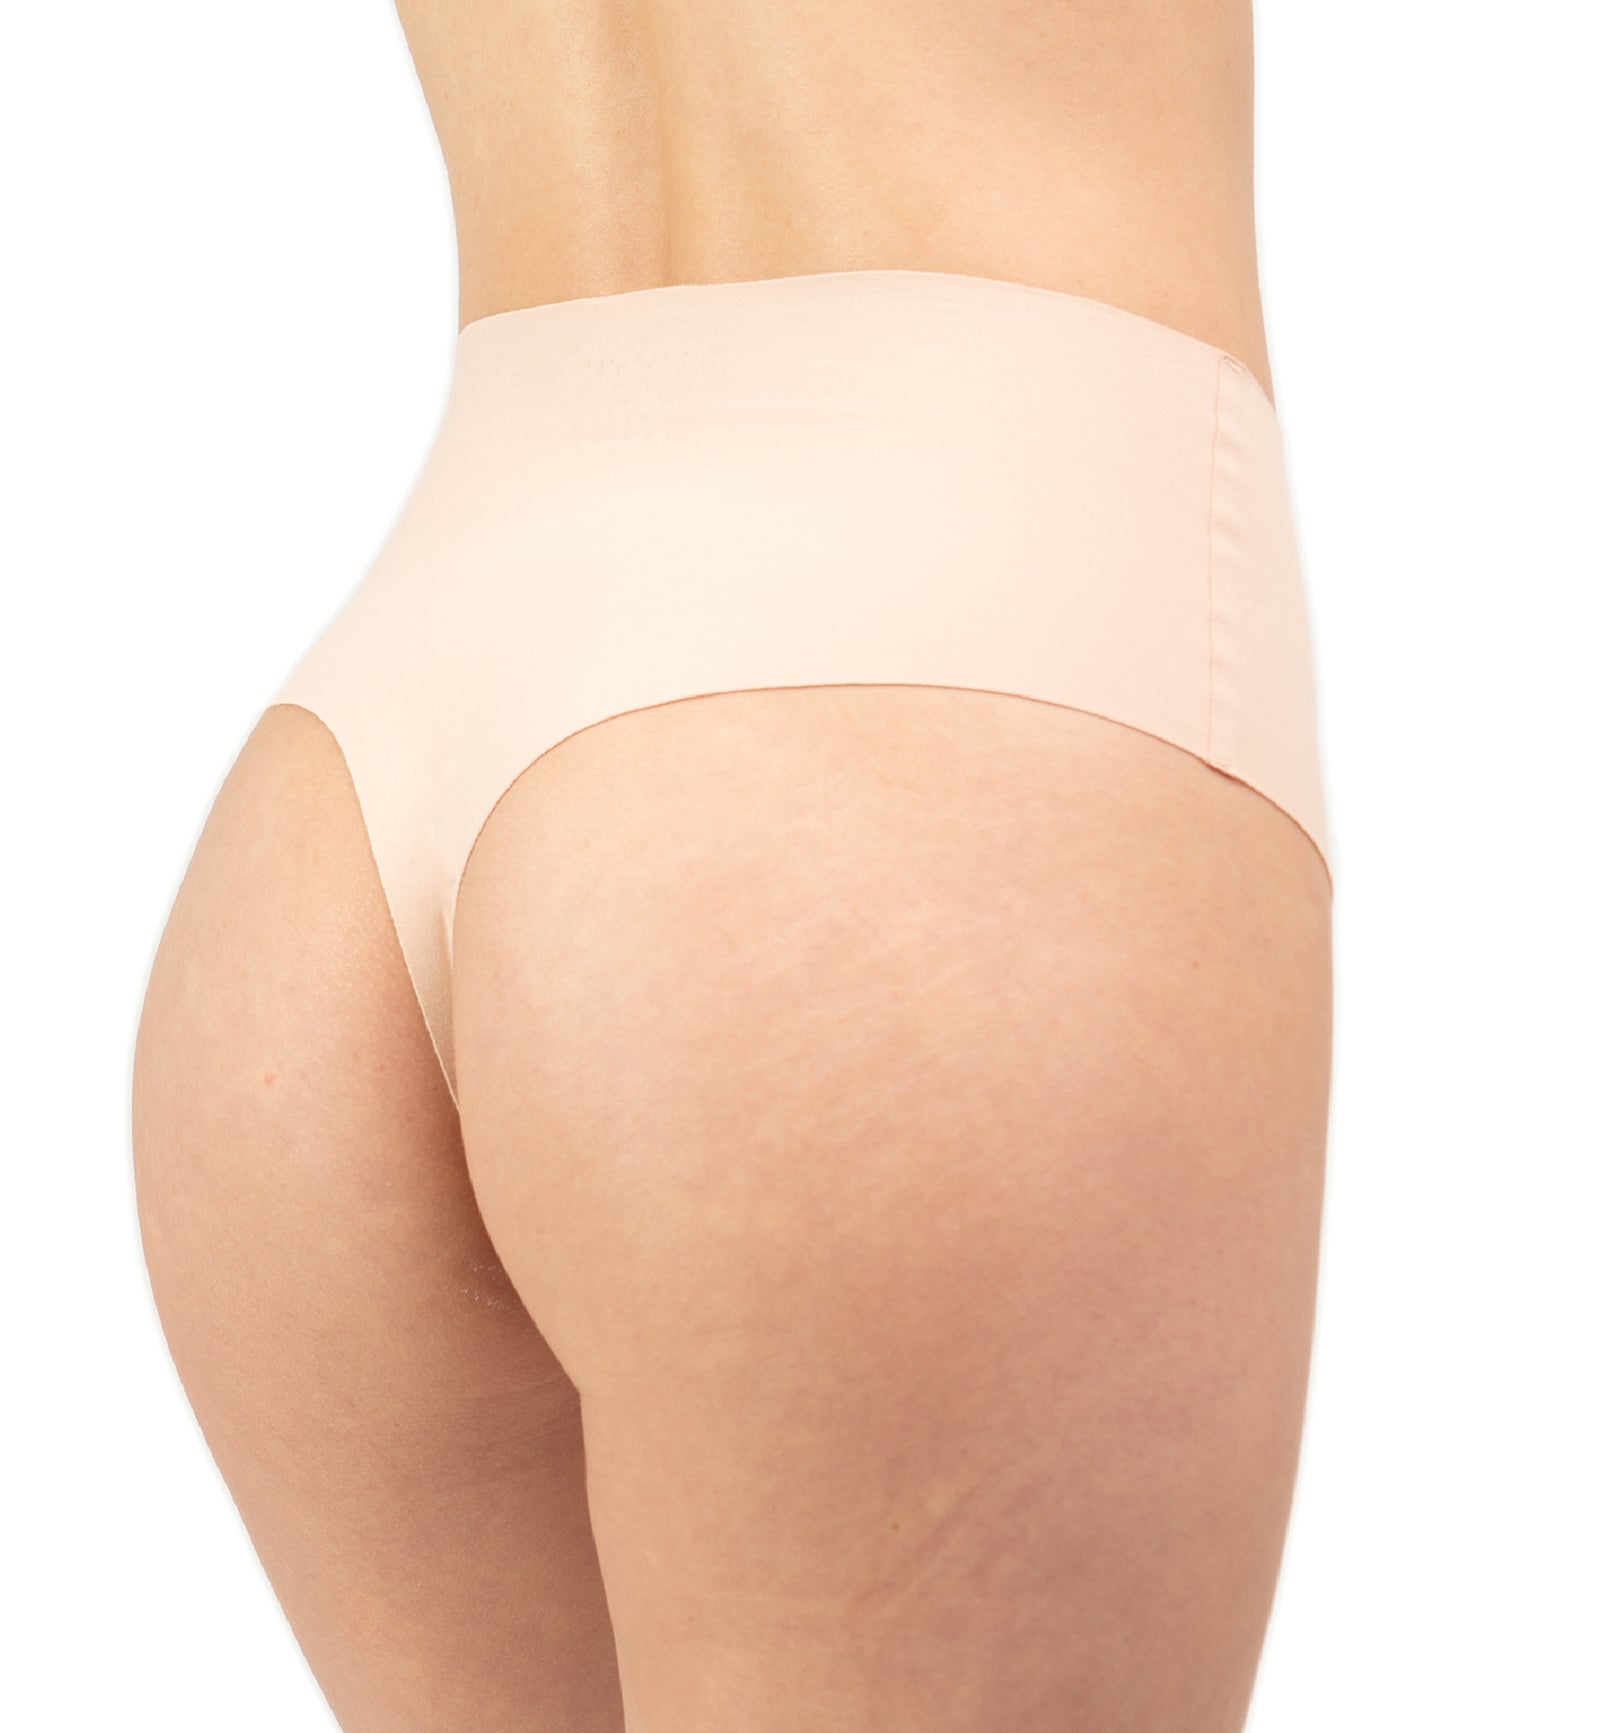 Panty Promise High Waist Thong,XS,Pale - Pale,XS